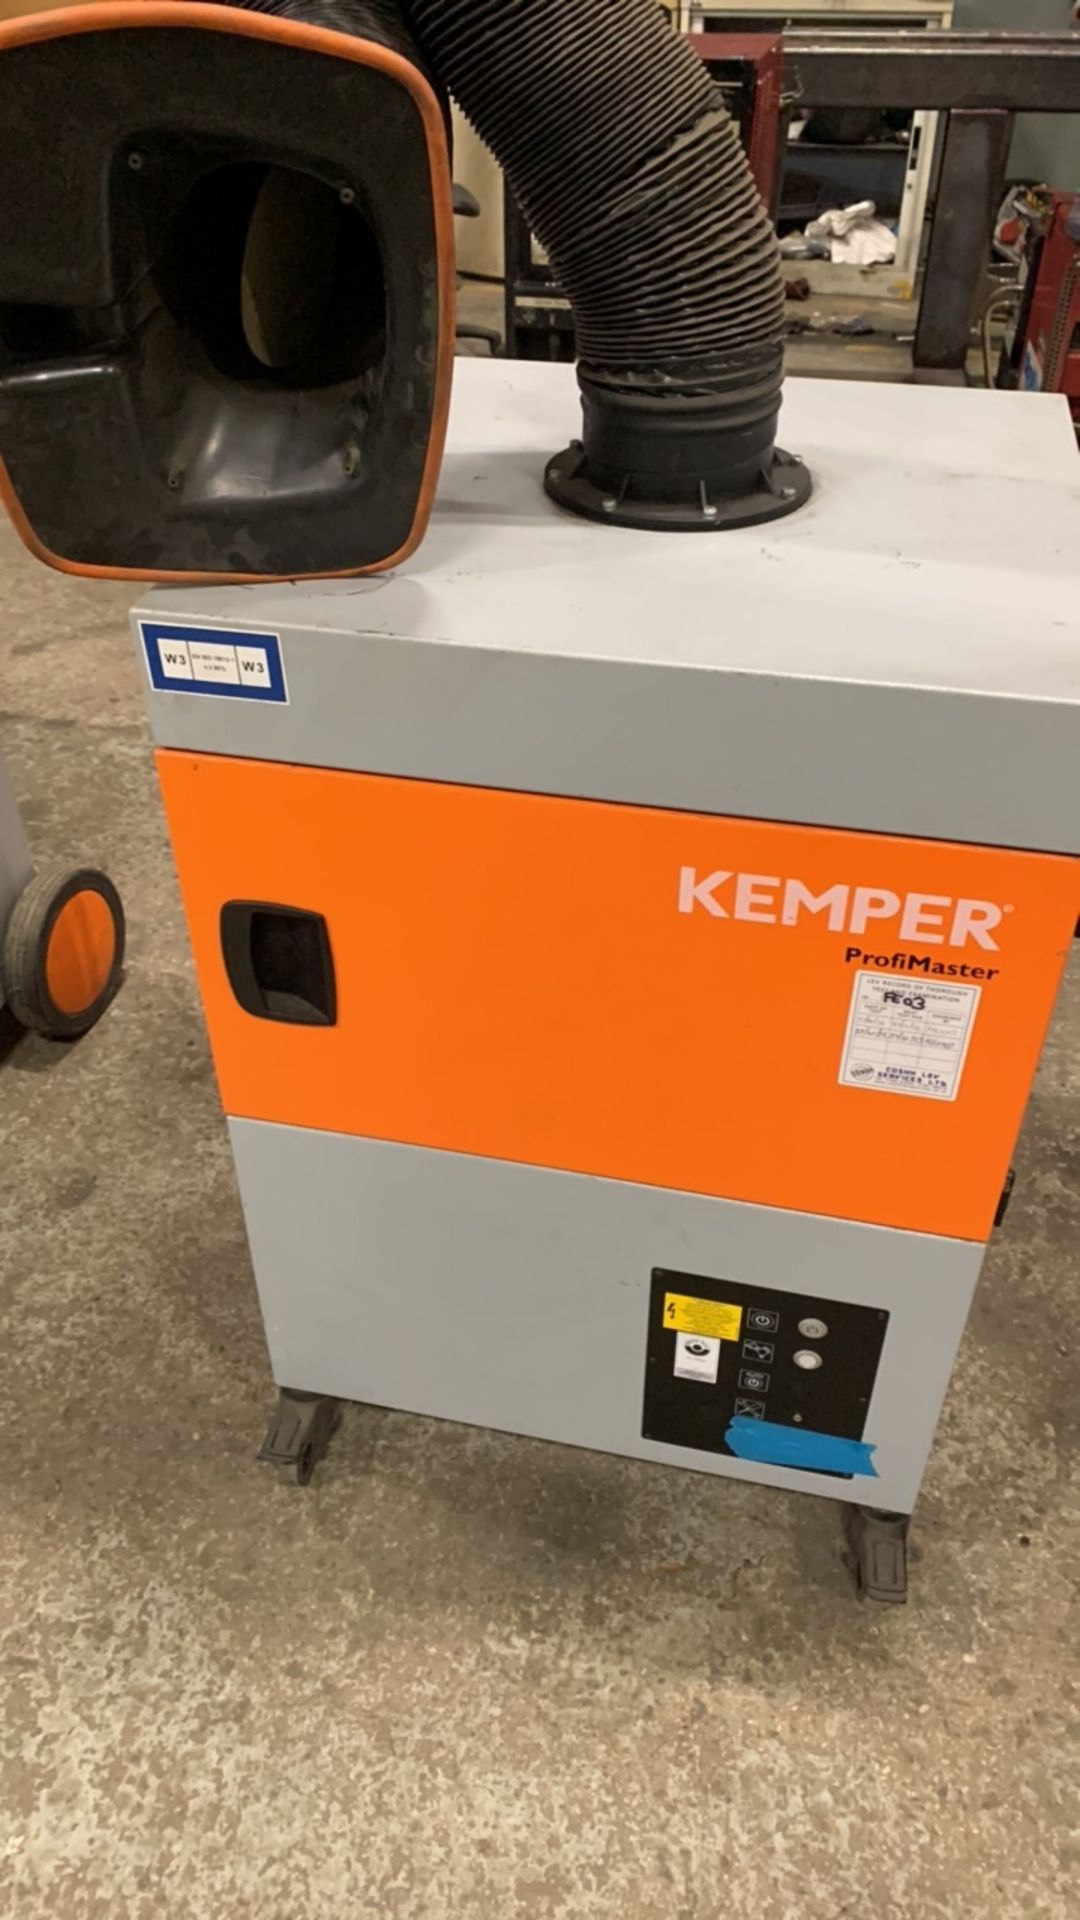 Kemper ProfiMaster 60655 Compact Fume Extraction Unit - Image 3 of 3